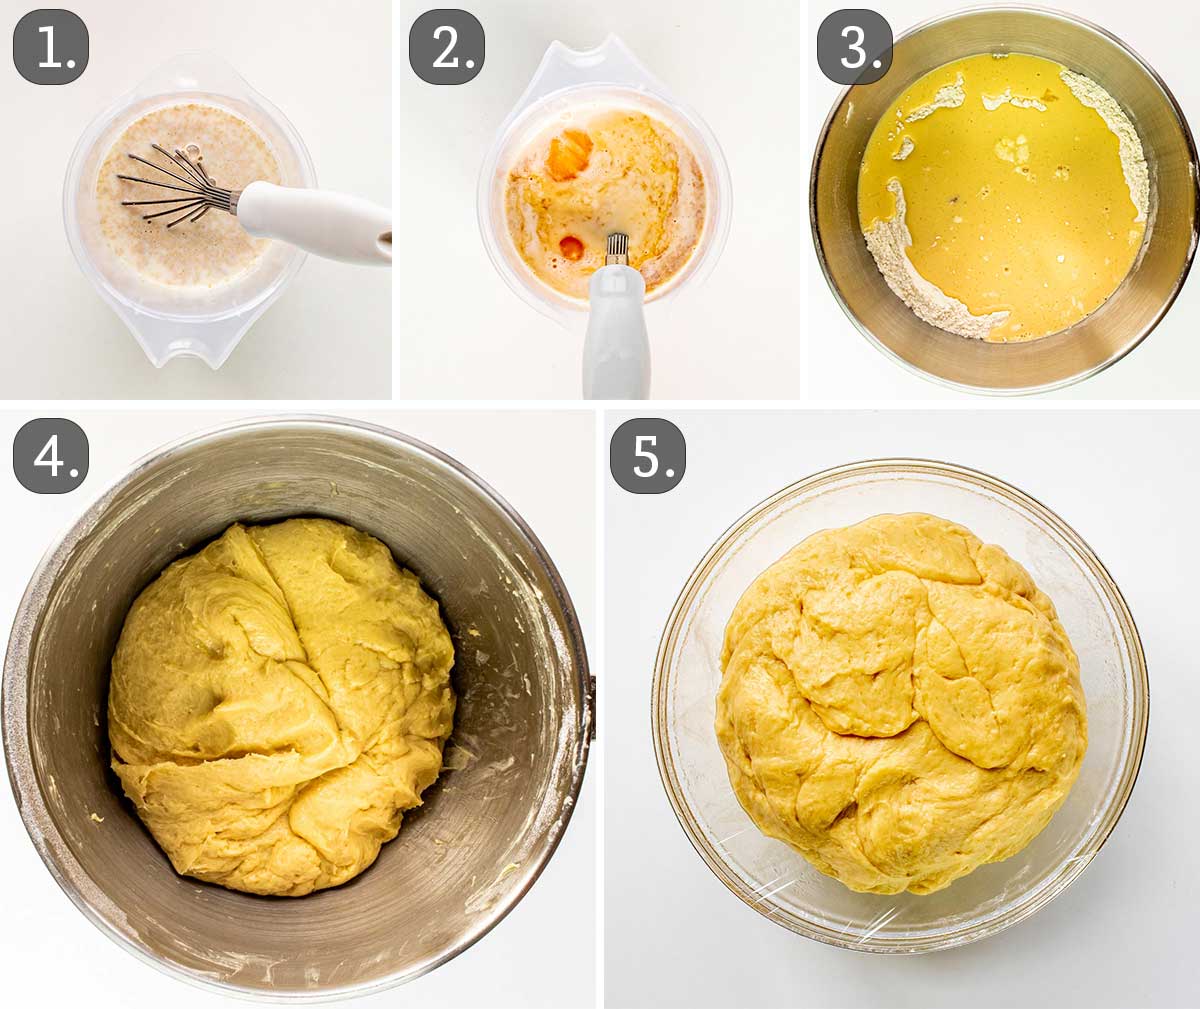 process shots showing how to make dough for blueberry rolls.